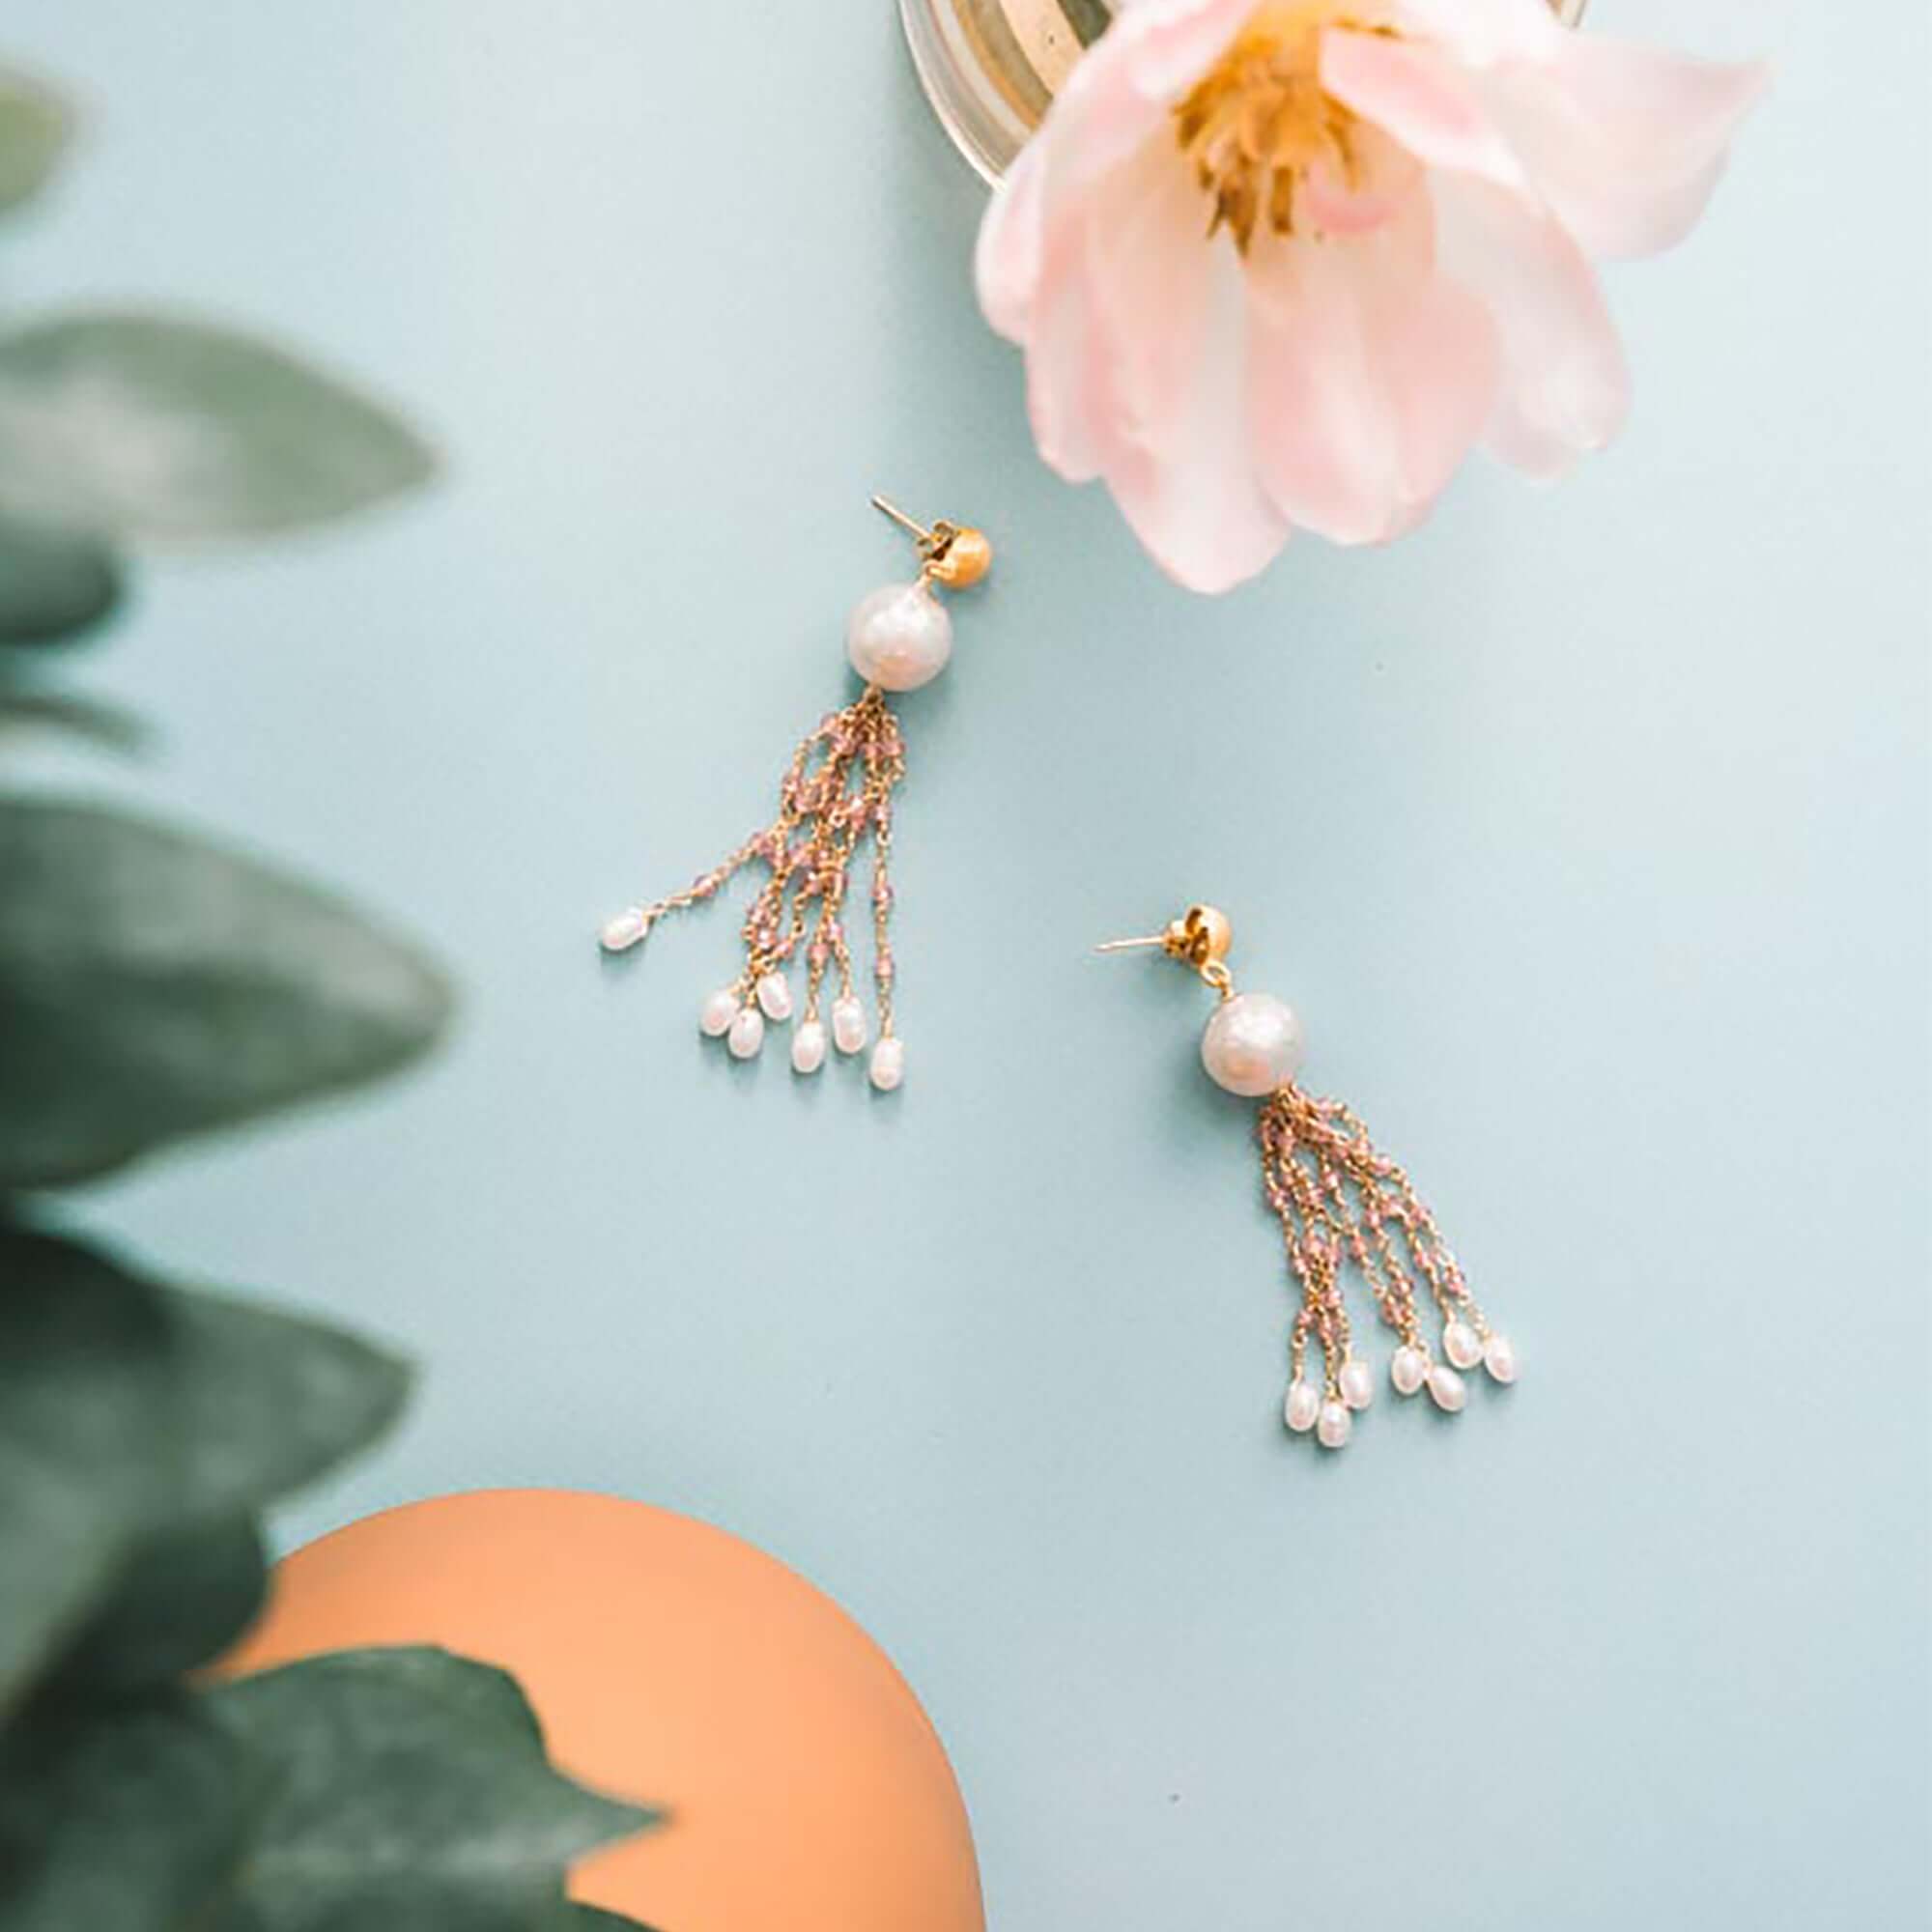 Freshwater baroque pearls, Rose Quartz and bead pearls Tassel Earrings in Gold plated Italian Silver